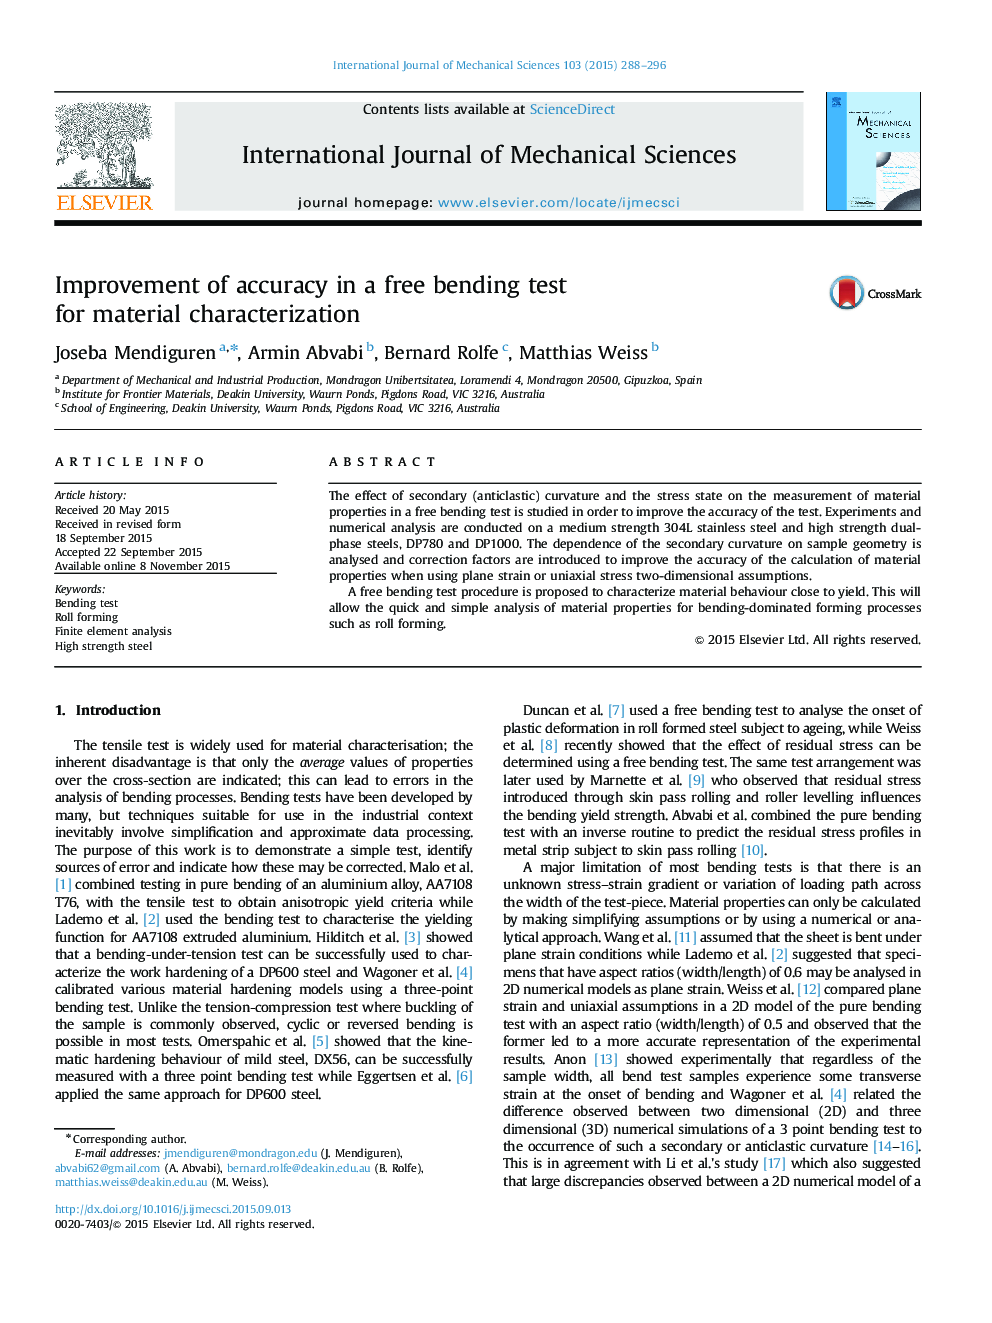 Improvement of accuracy in a free bending test for material characterization